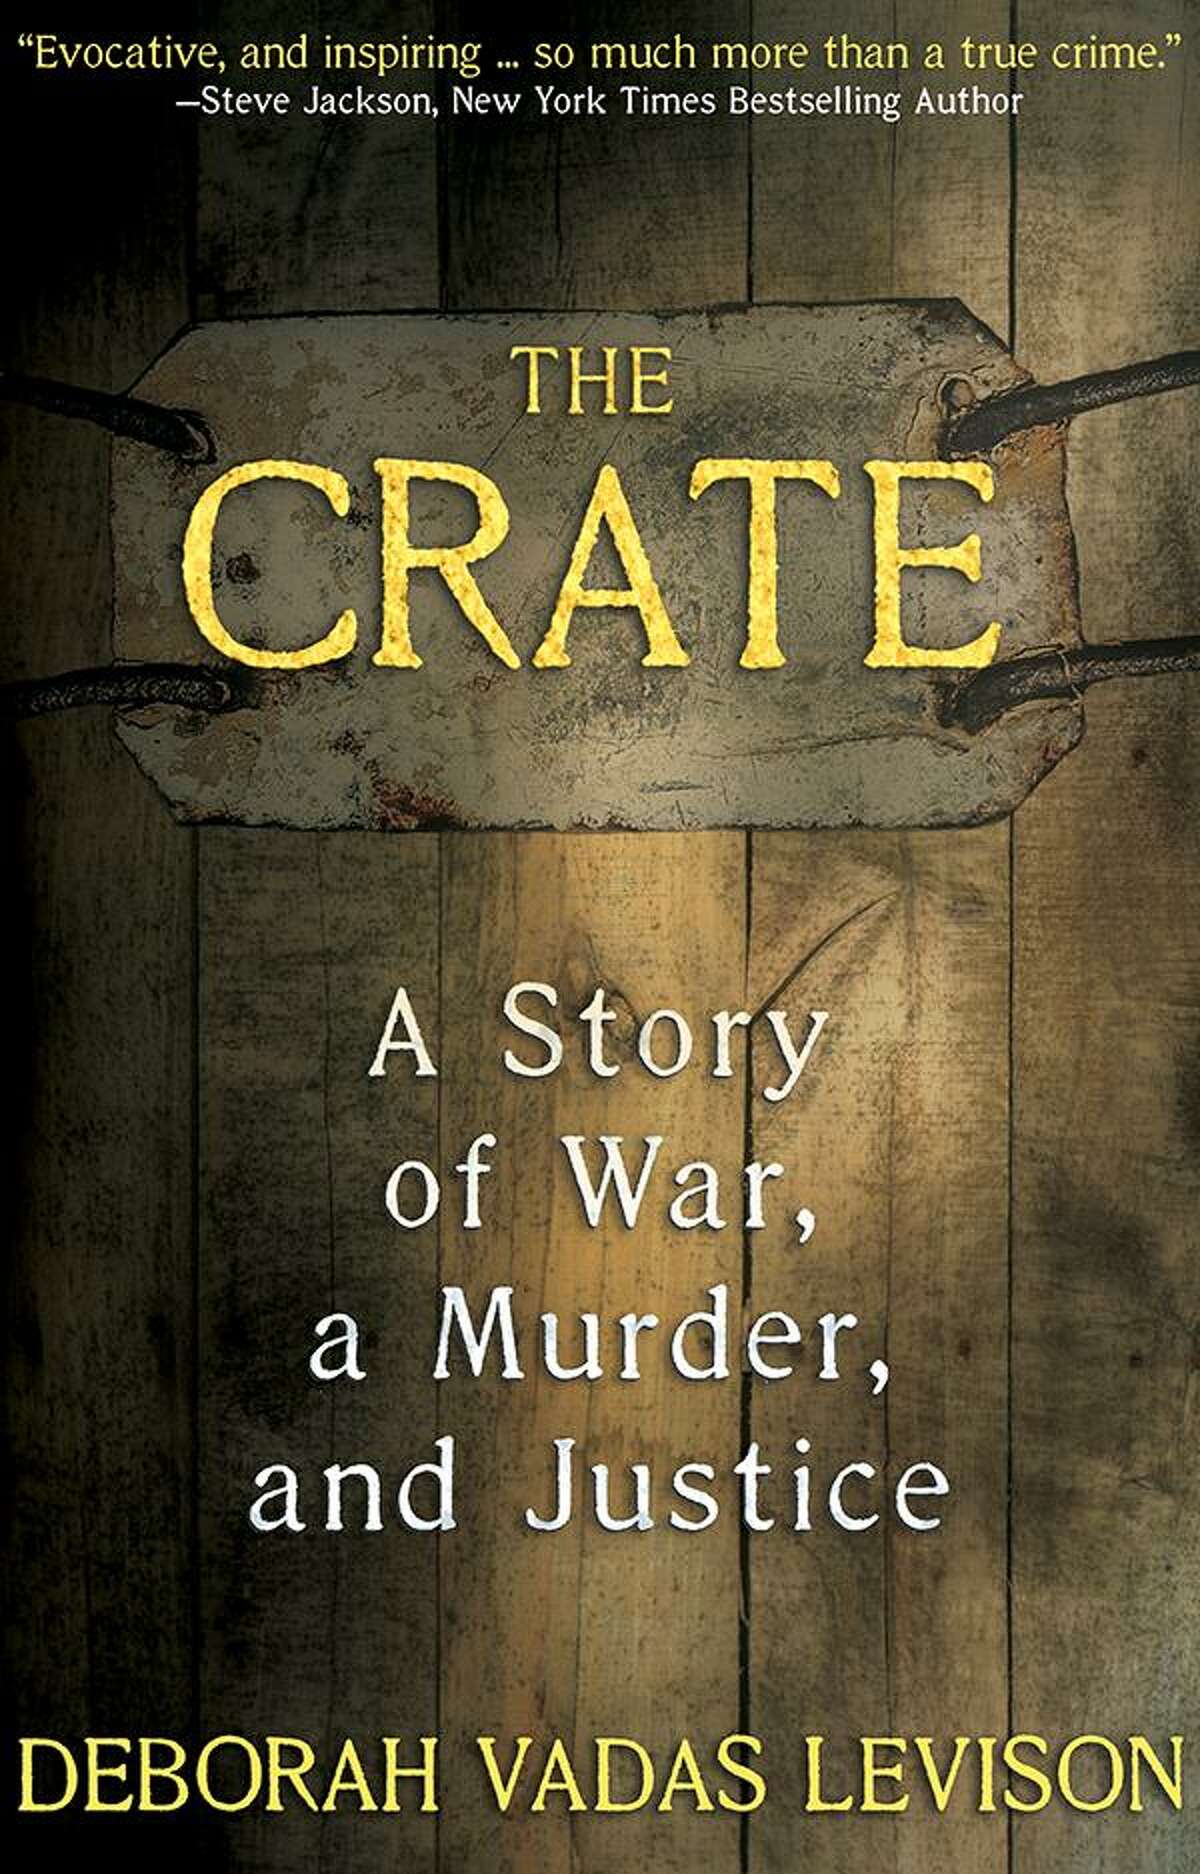 The cover of Deborah Levison’s latest book, ‘The Crate.’